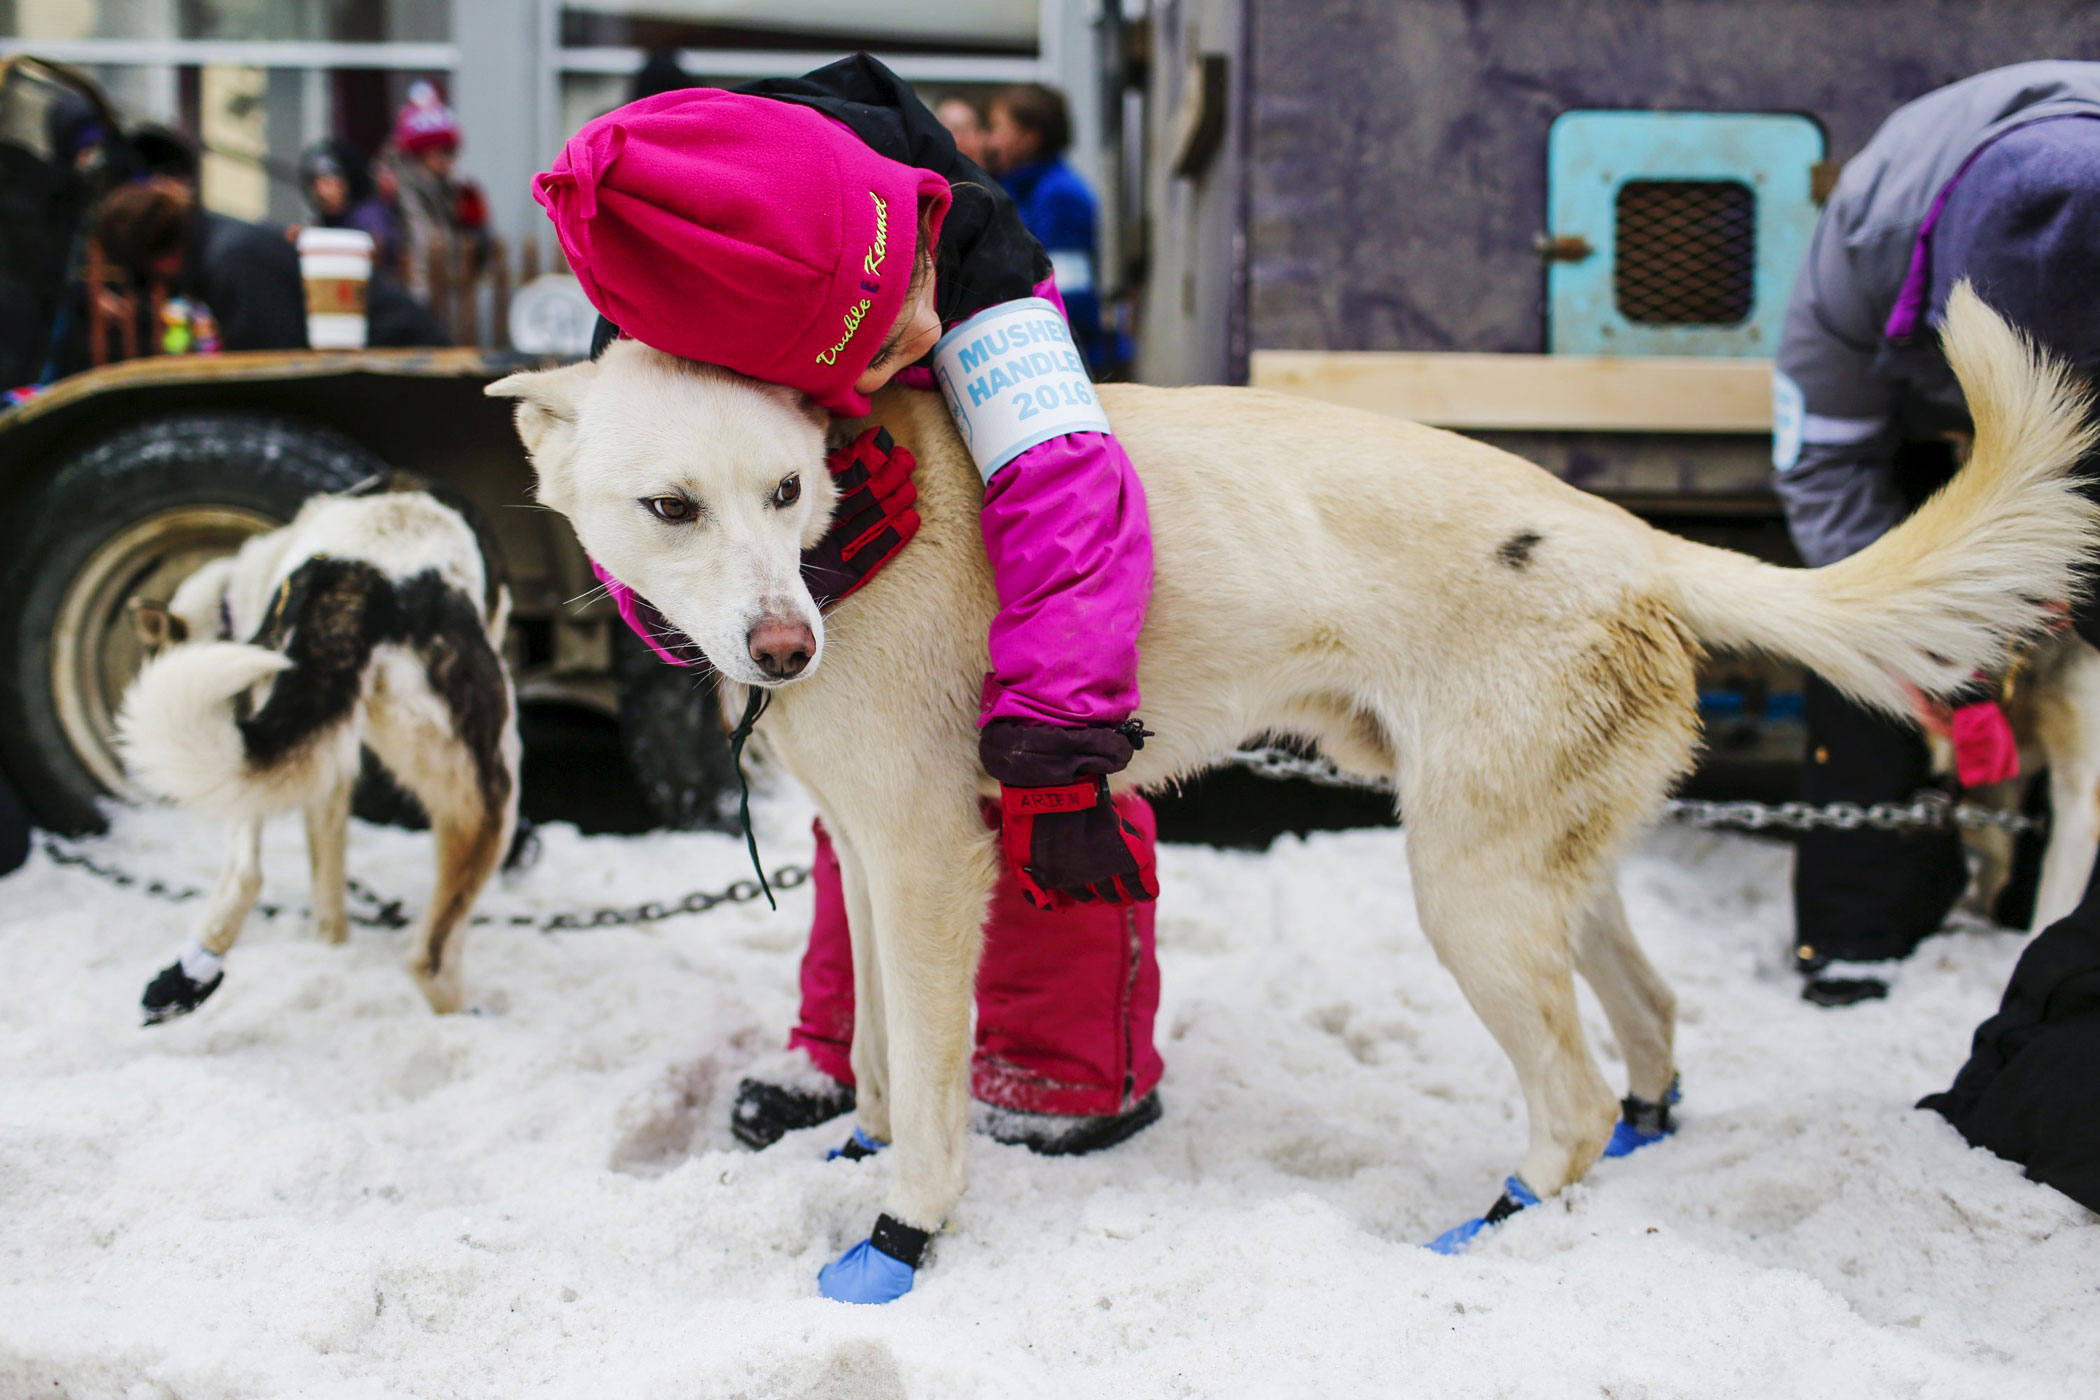 A handler with Alan Eischen's team embraces one of Eischen's dogs before the ceremonial start of the Iditarod Trail Sled Dog Race in Anchorage, Alaska on March 5.